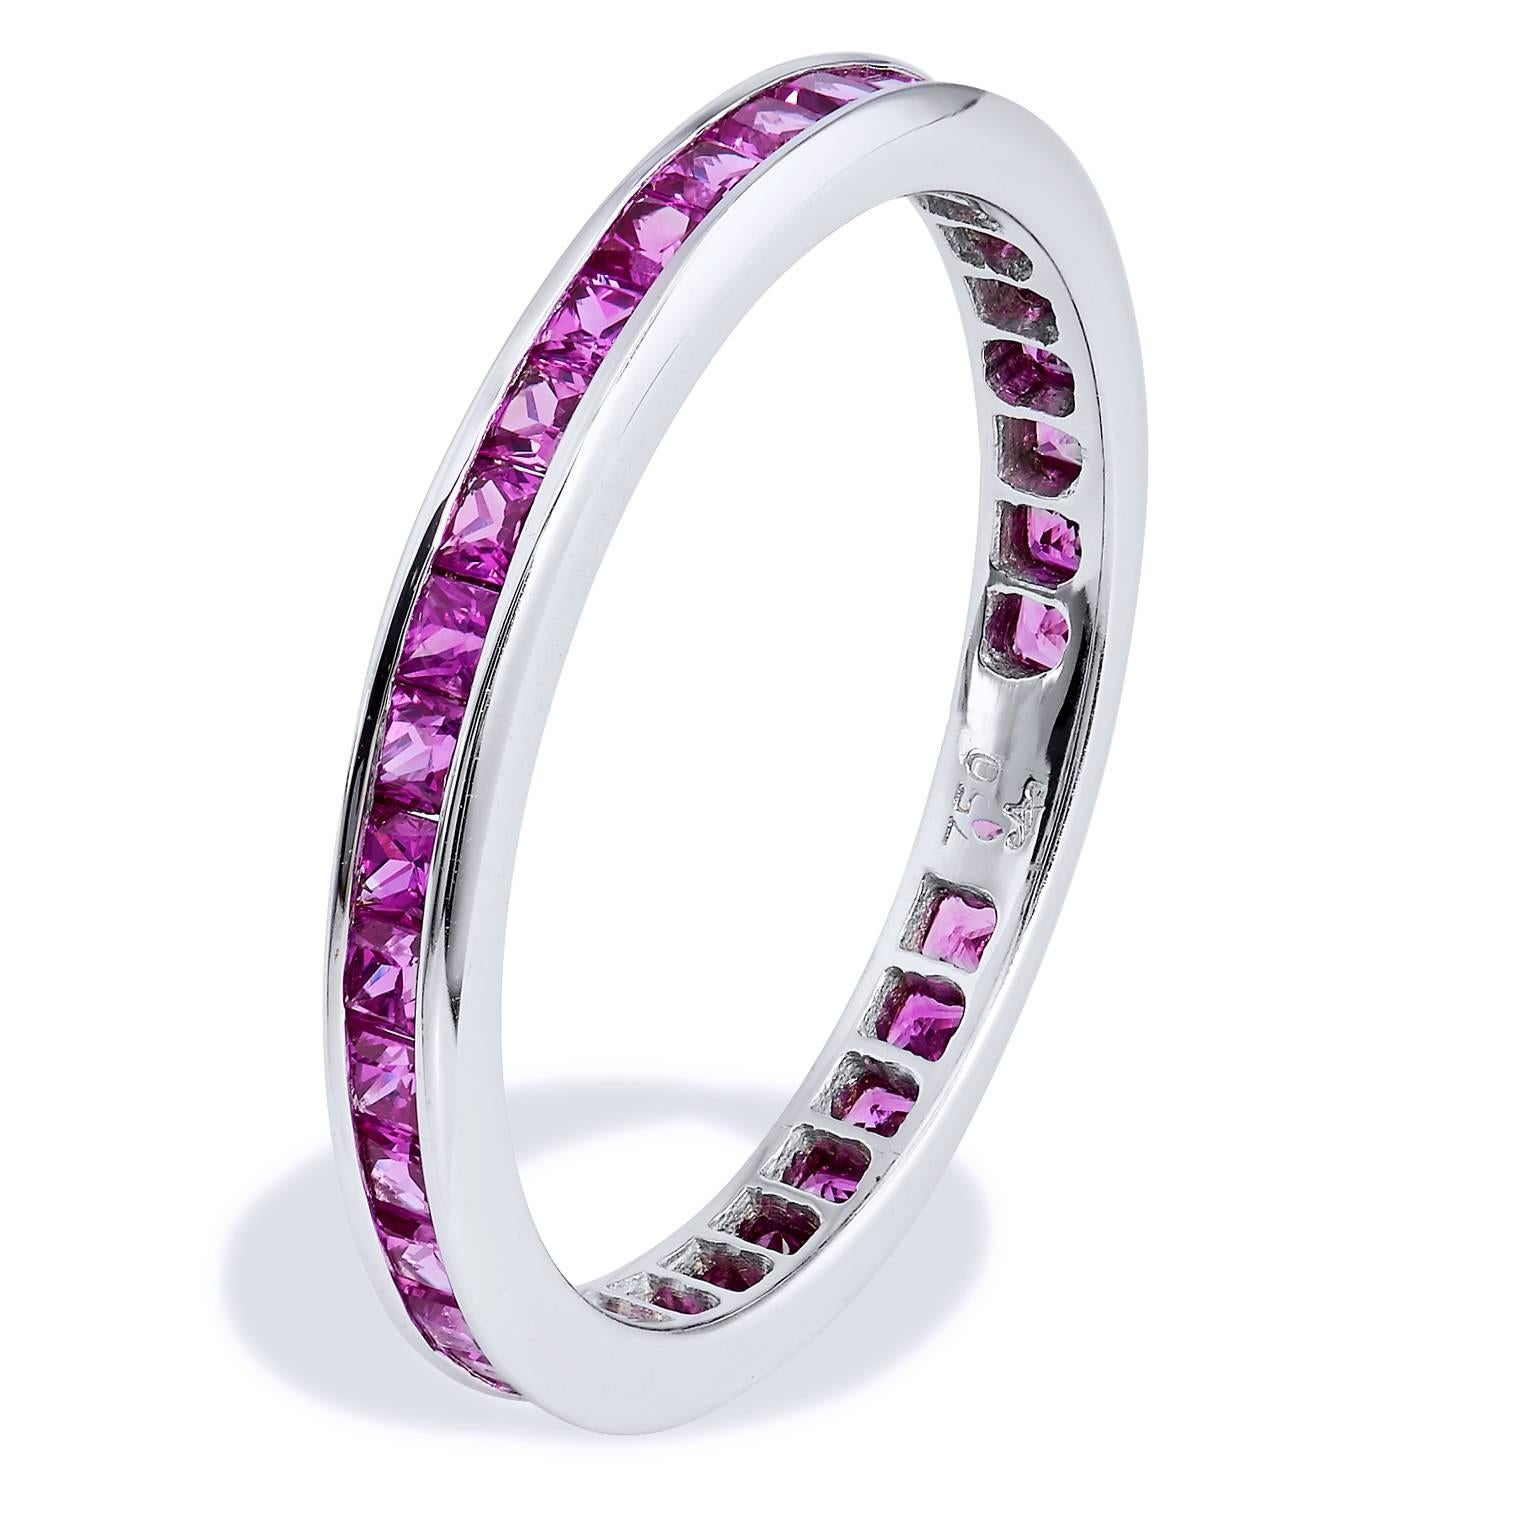 Princess Cut Pink Sapphire Band Ring

A ring as sweet as she. 1.30 carat of Princess cut pink sapphires in channel setting flow like liquid in this 18 karat white gold band ring (size: 6.5).